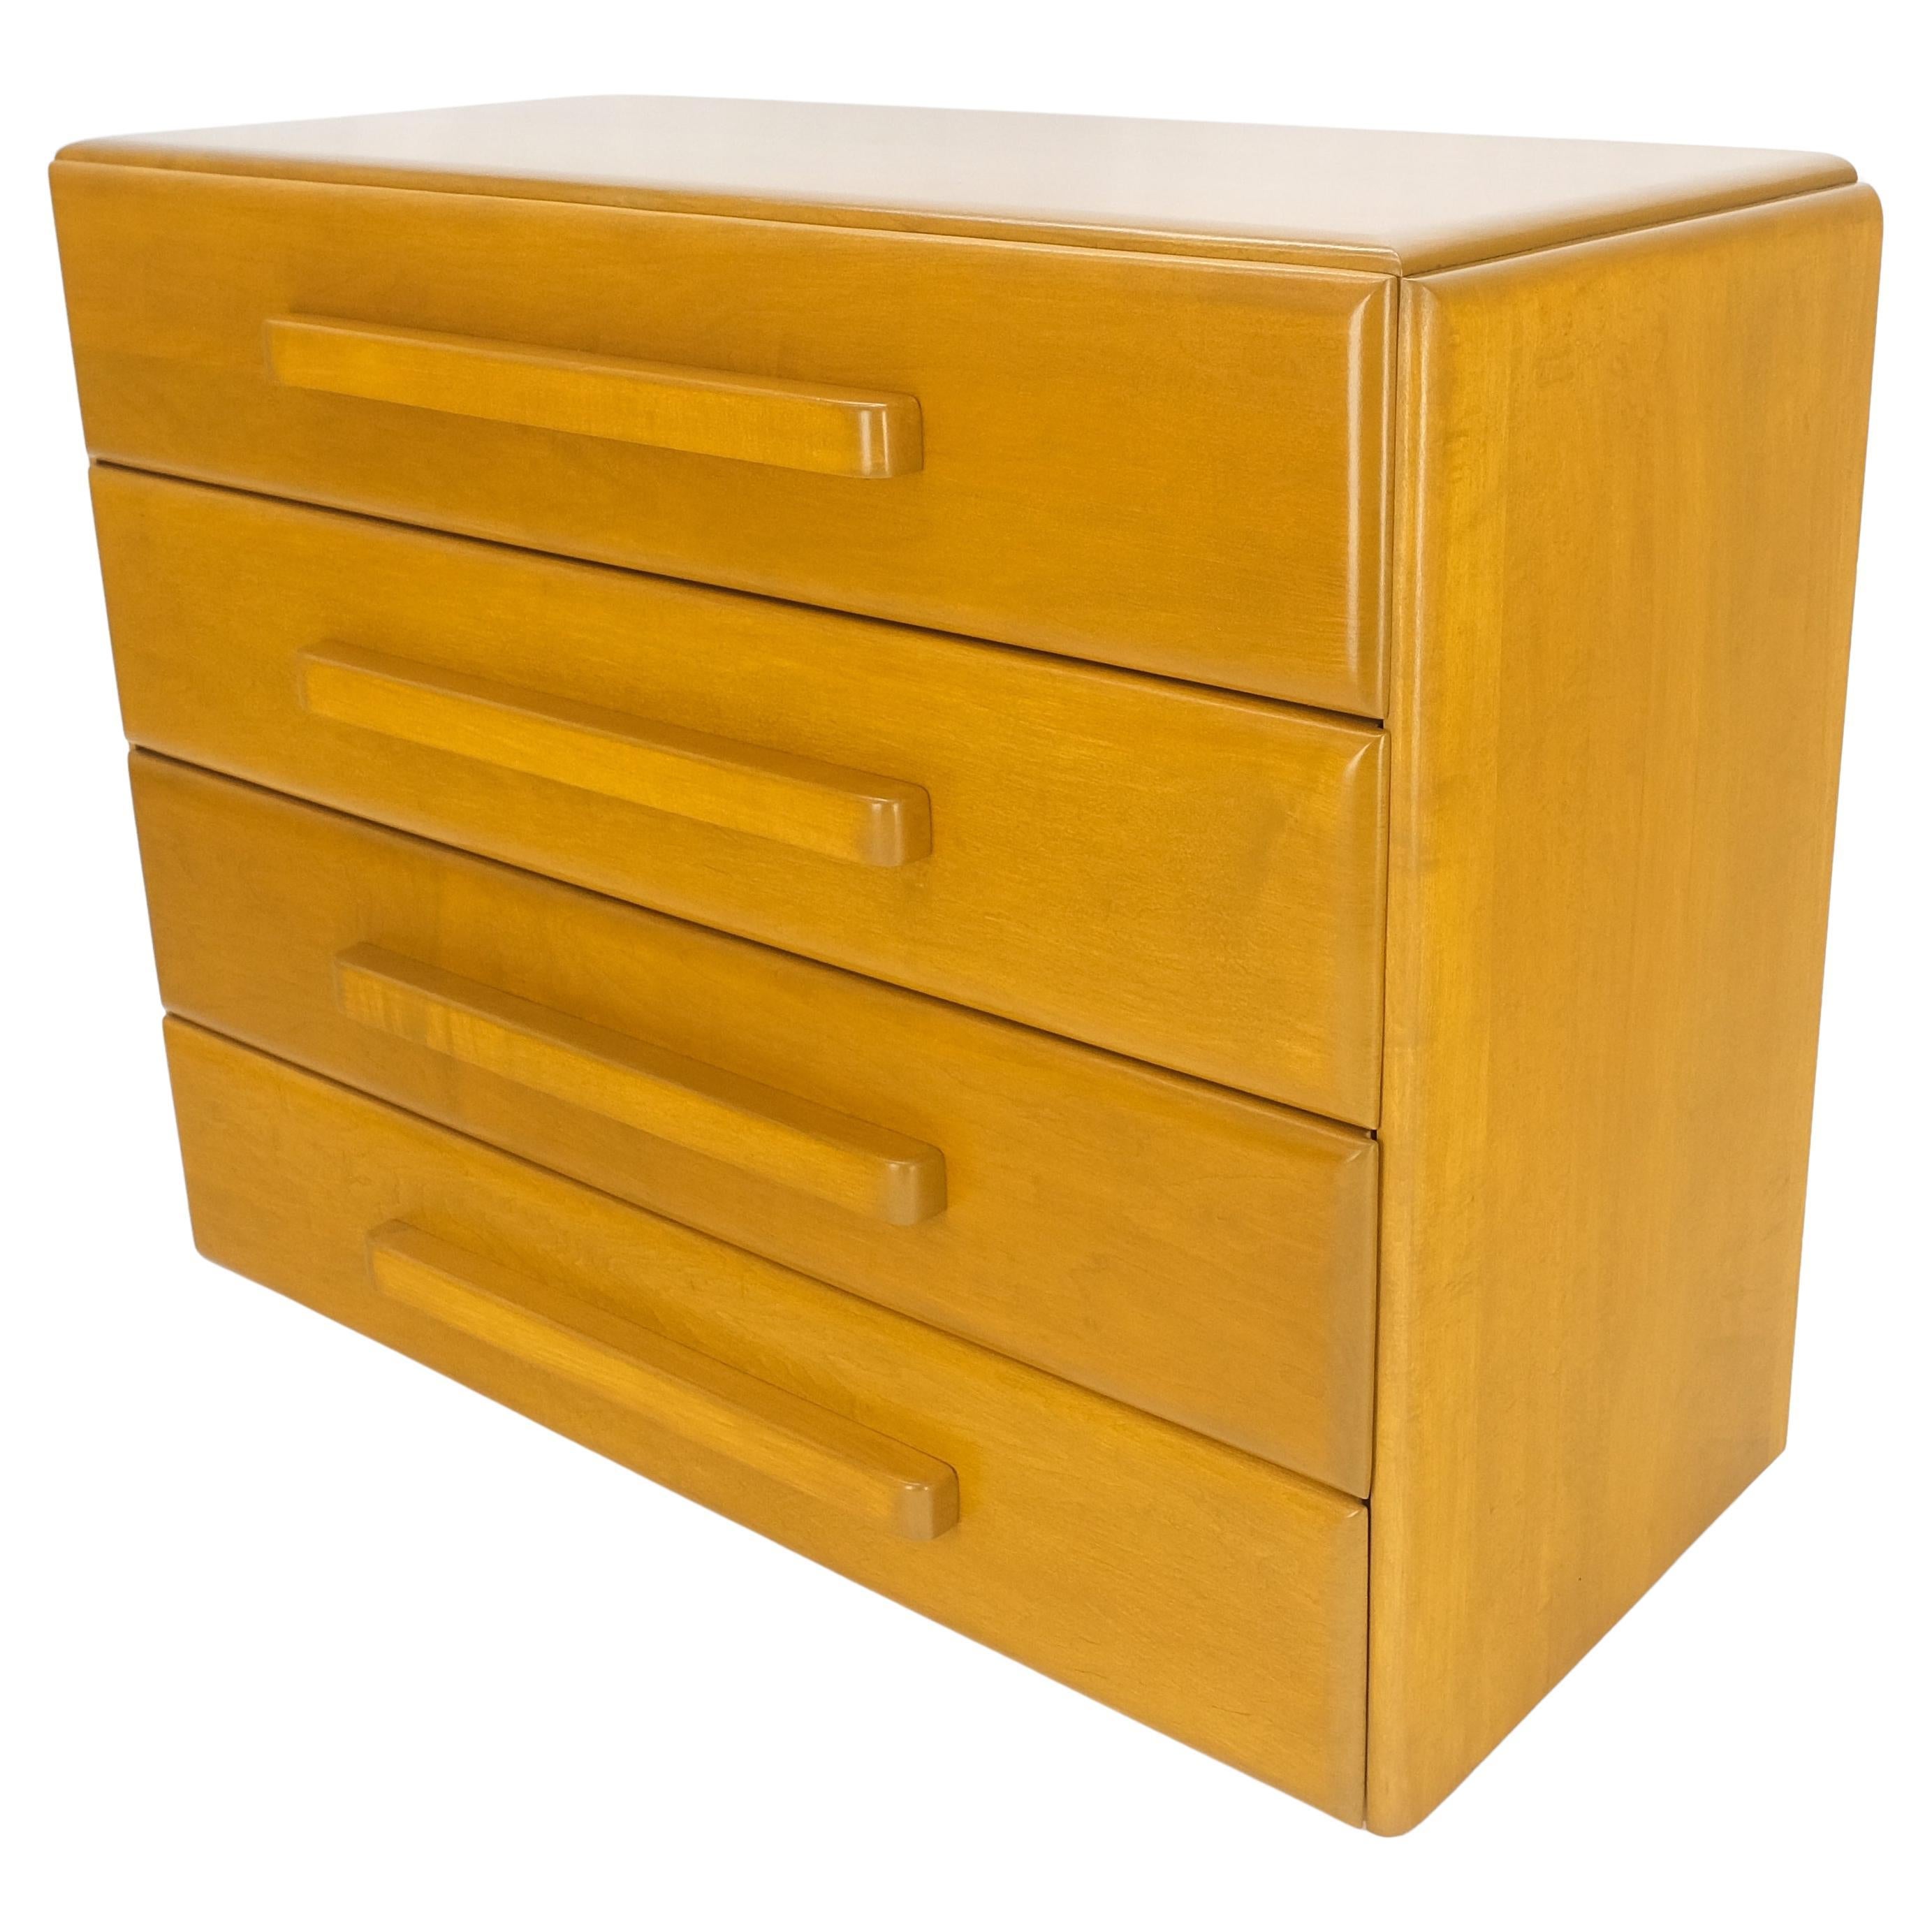 1960 Solid Maple Restored Wrussel Right Conant Ball Solid Maple 4 Drawer Dresser For Sale